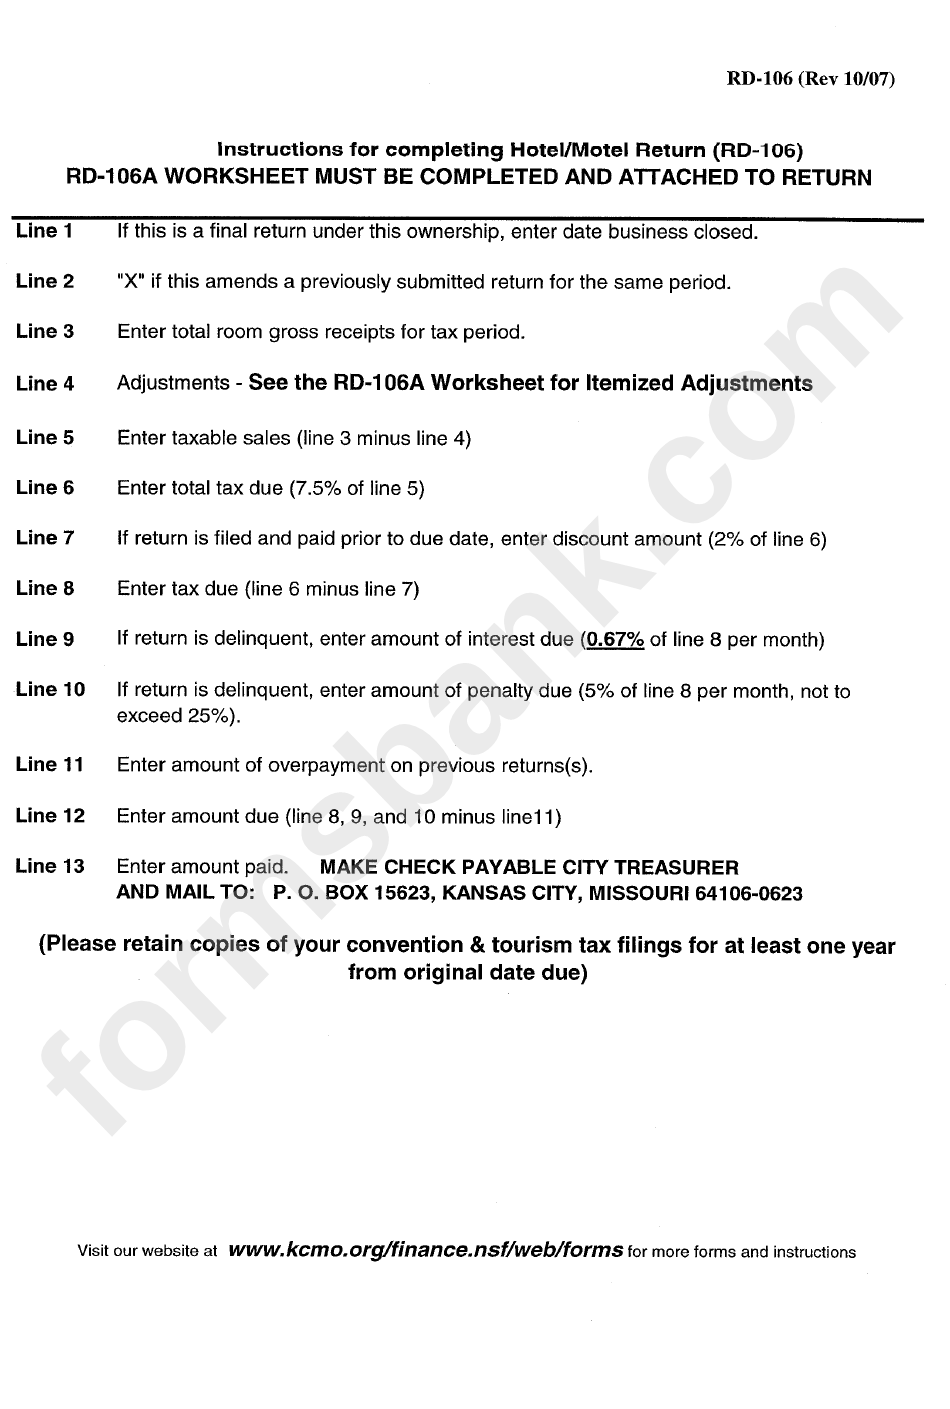 Form Rd106a - Convention And Tourism Hotel/motel Worksheet For Itemized Adjustments - Kansas City, Missouri Revenue Division